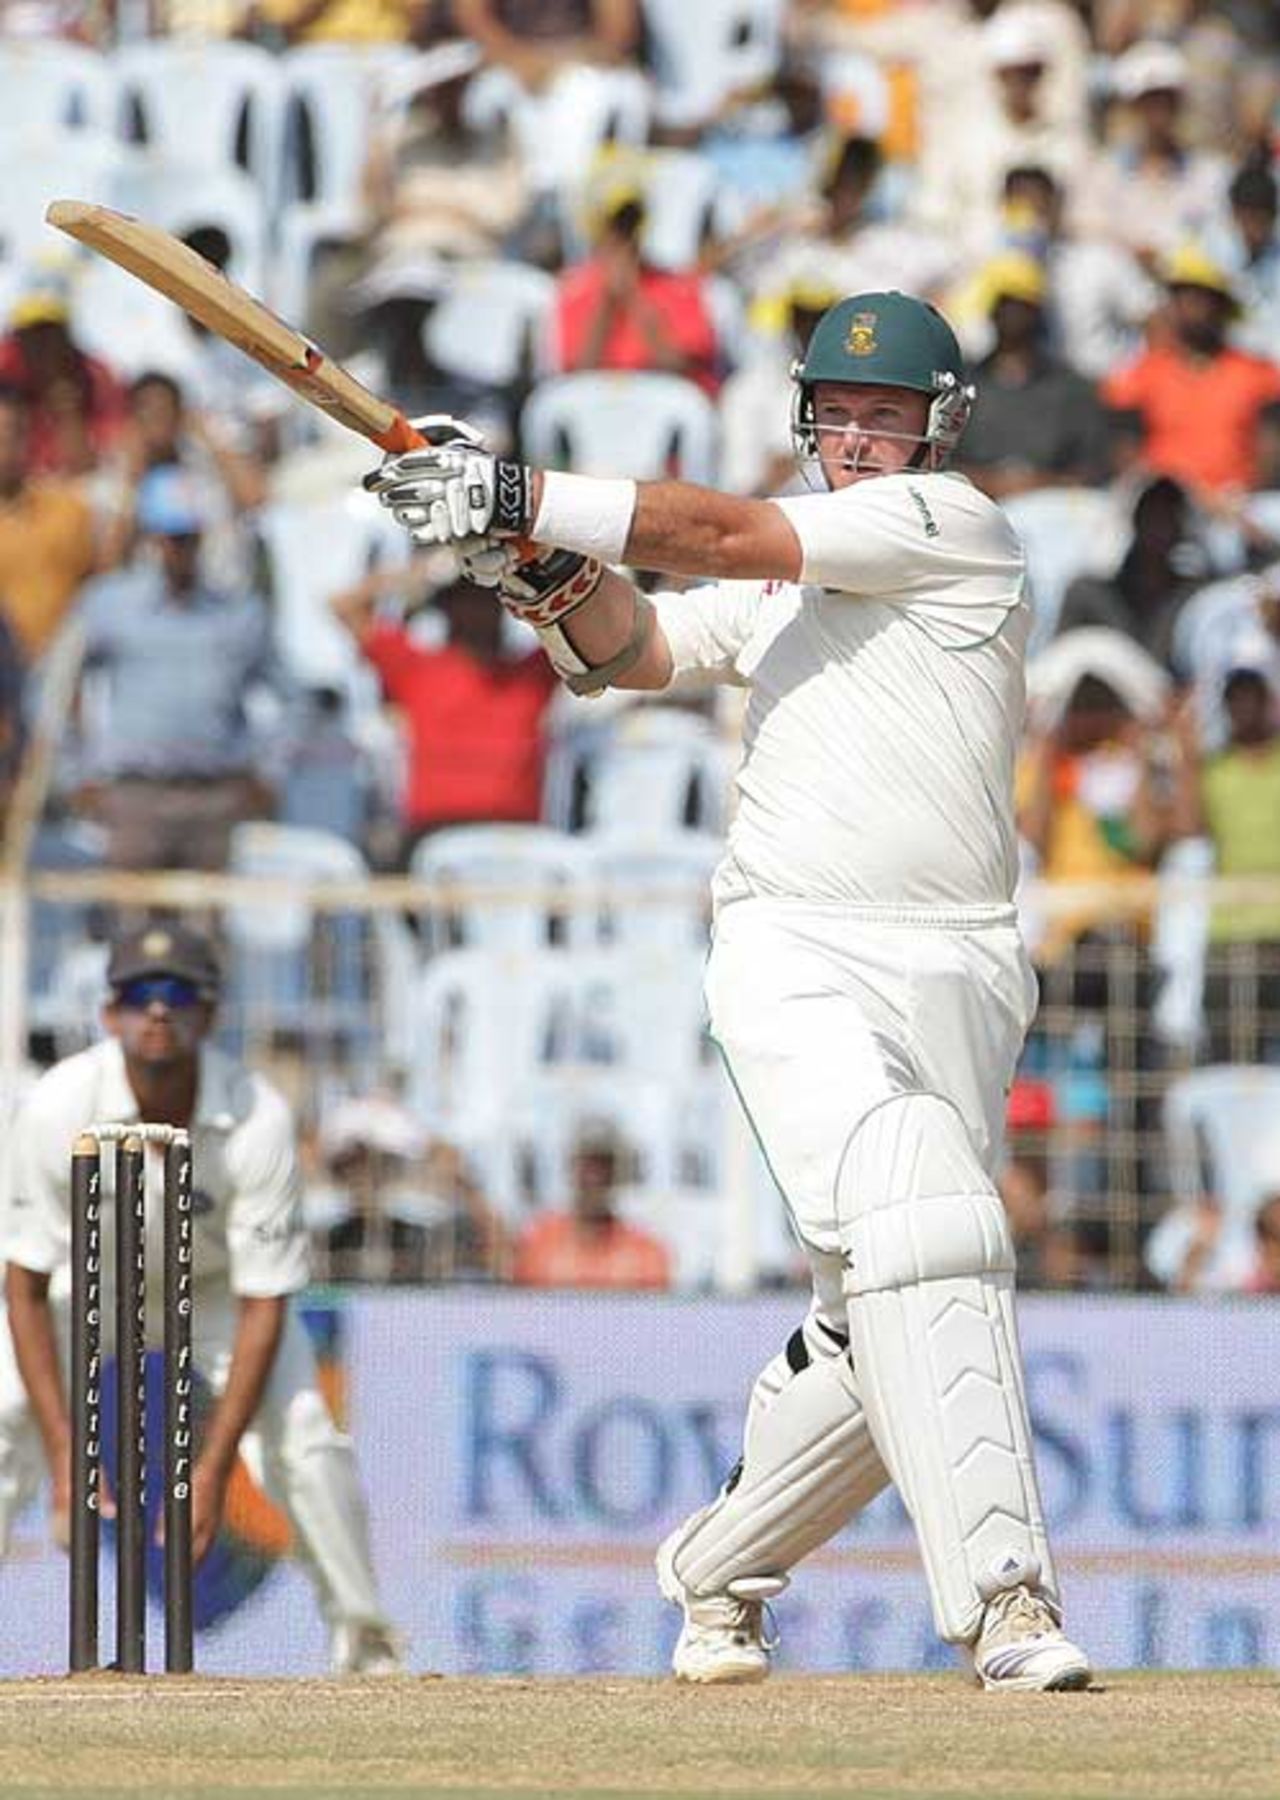 Graeme Smith got South Africa's second innings off briskly, India v South Africa, 1st Test, Chennai, 4th day, March 29, 2008 